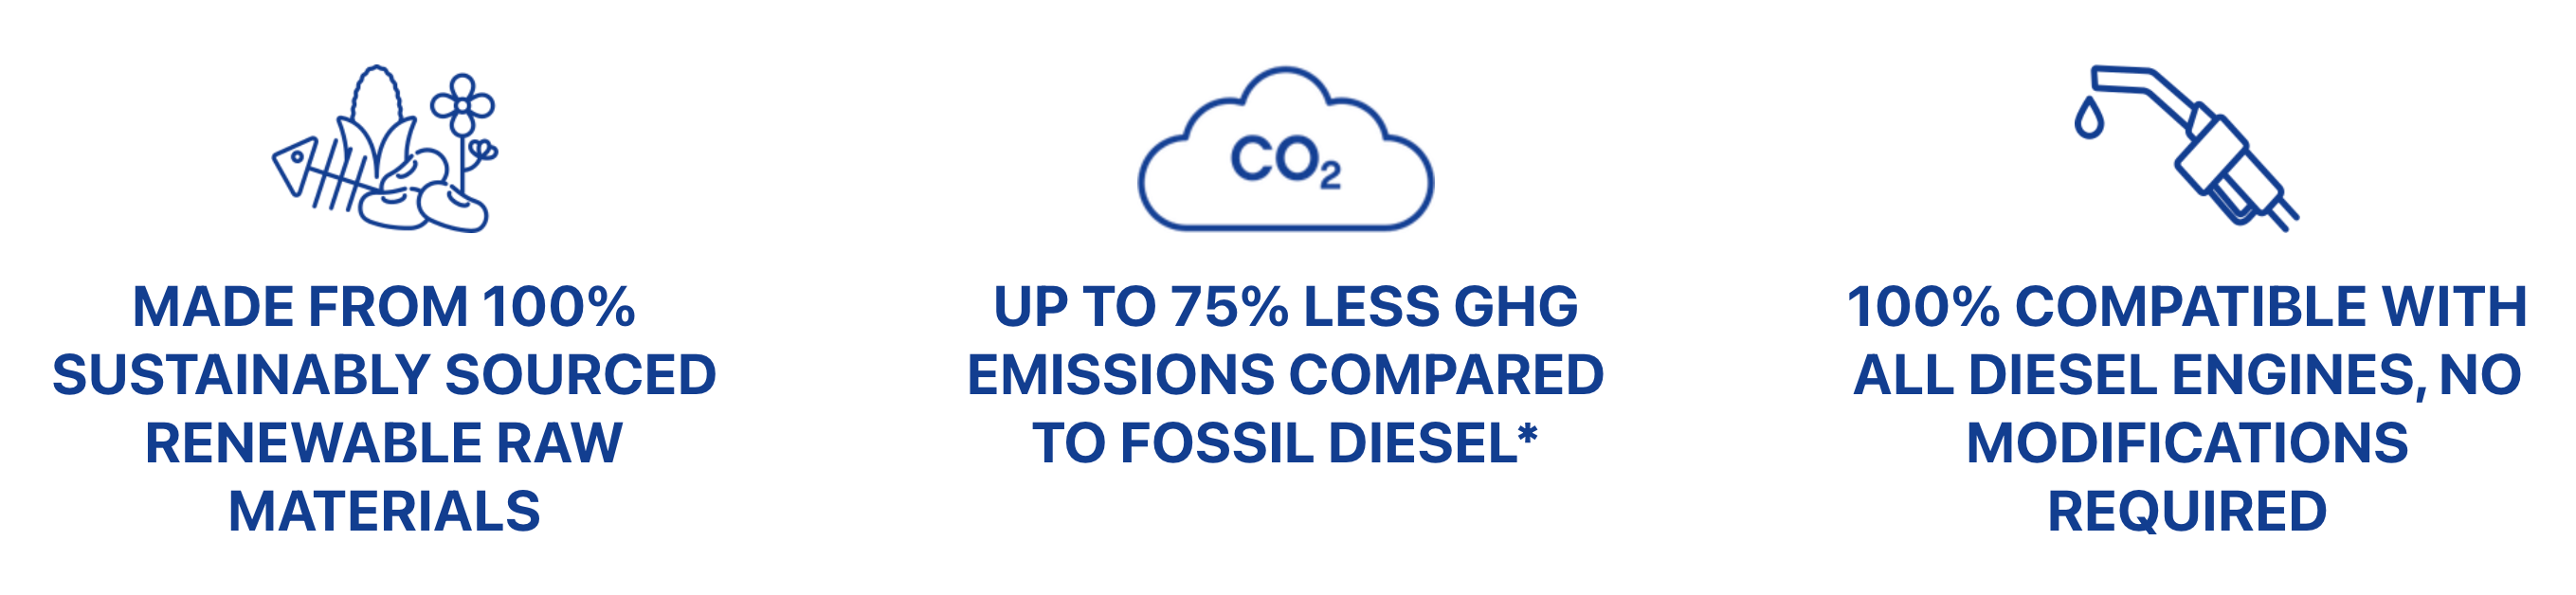 Renewable-Diesel-Sustainably-Made-With-Raw-Materials